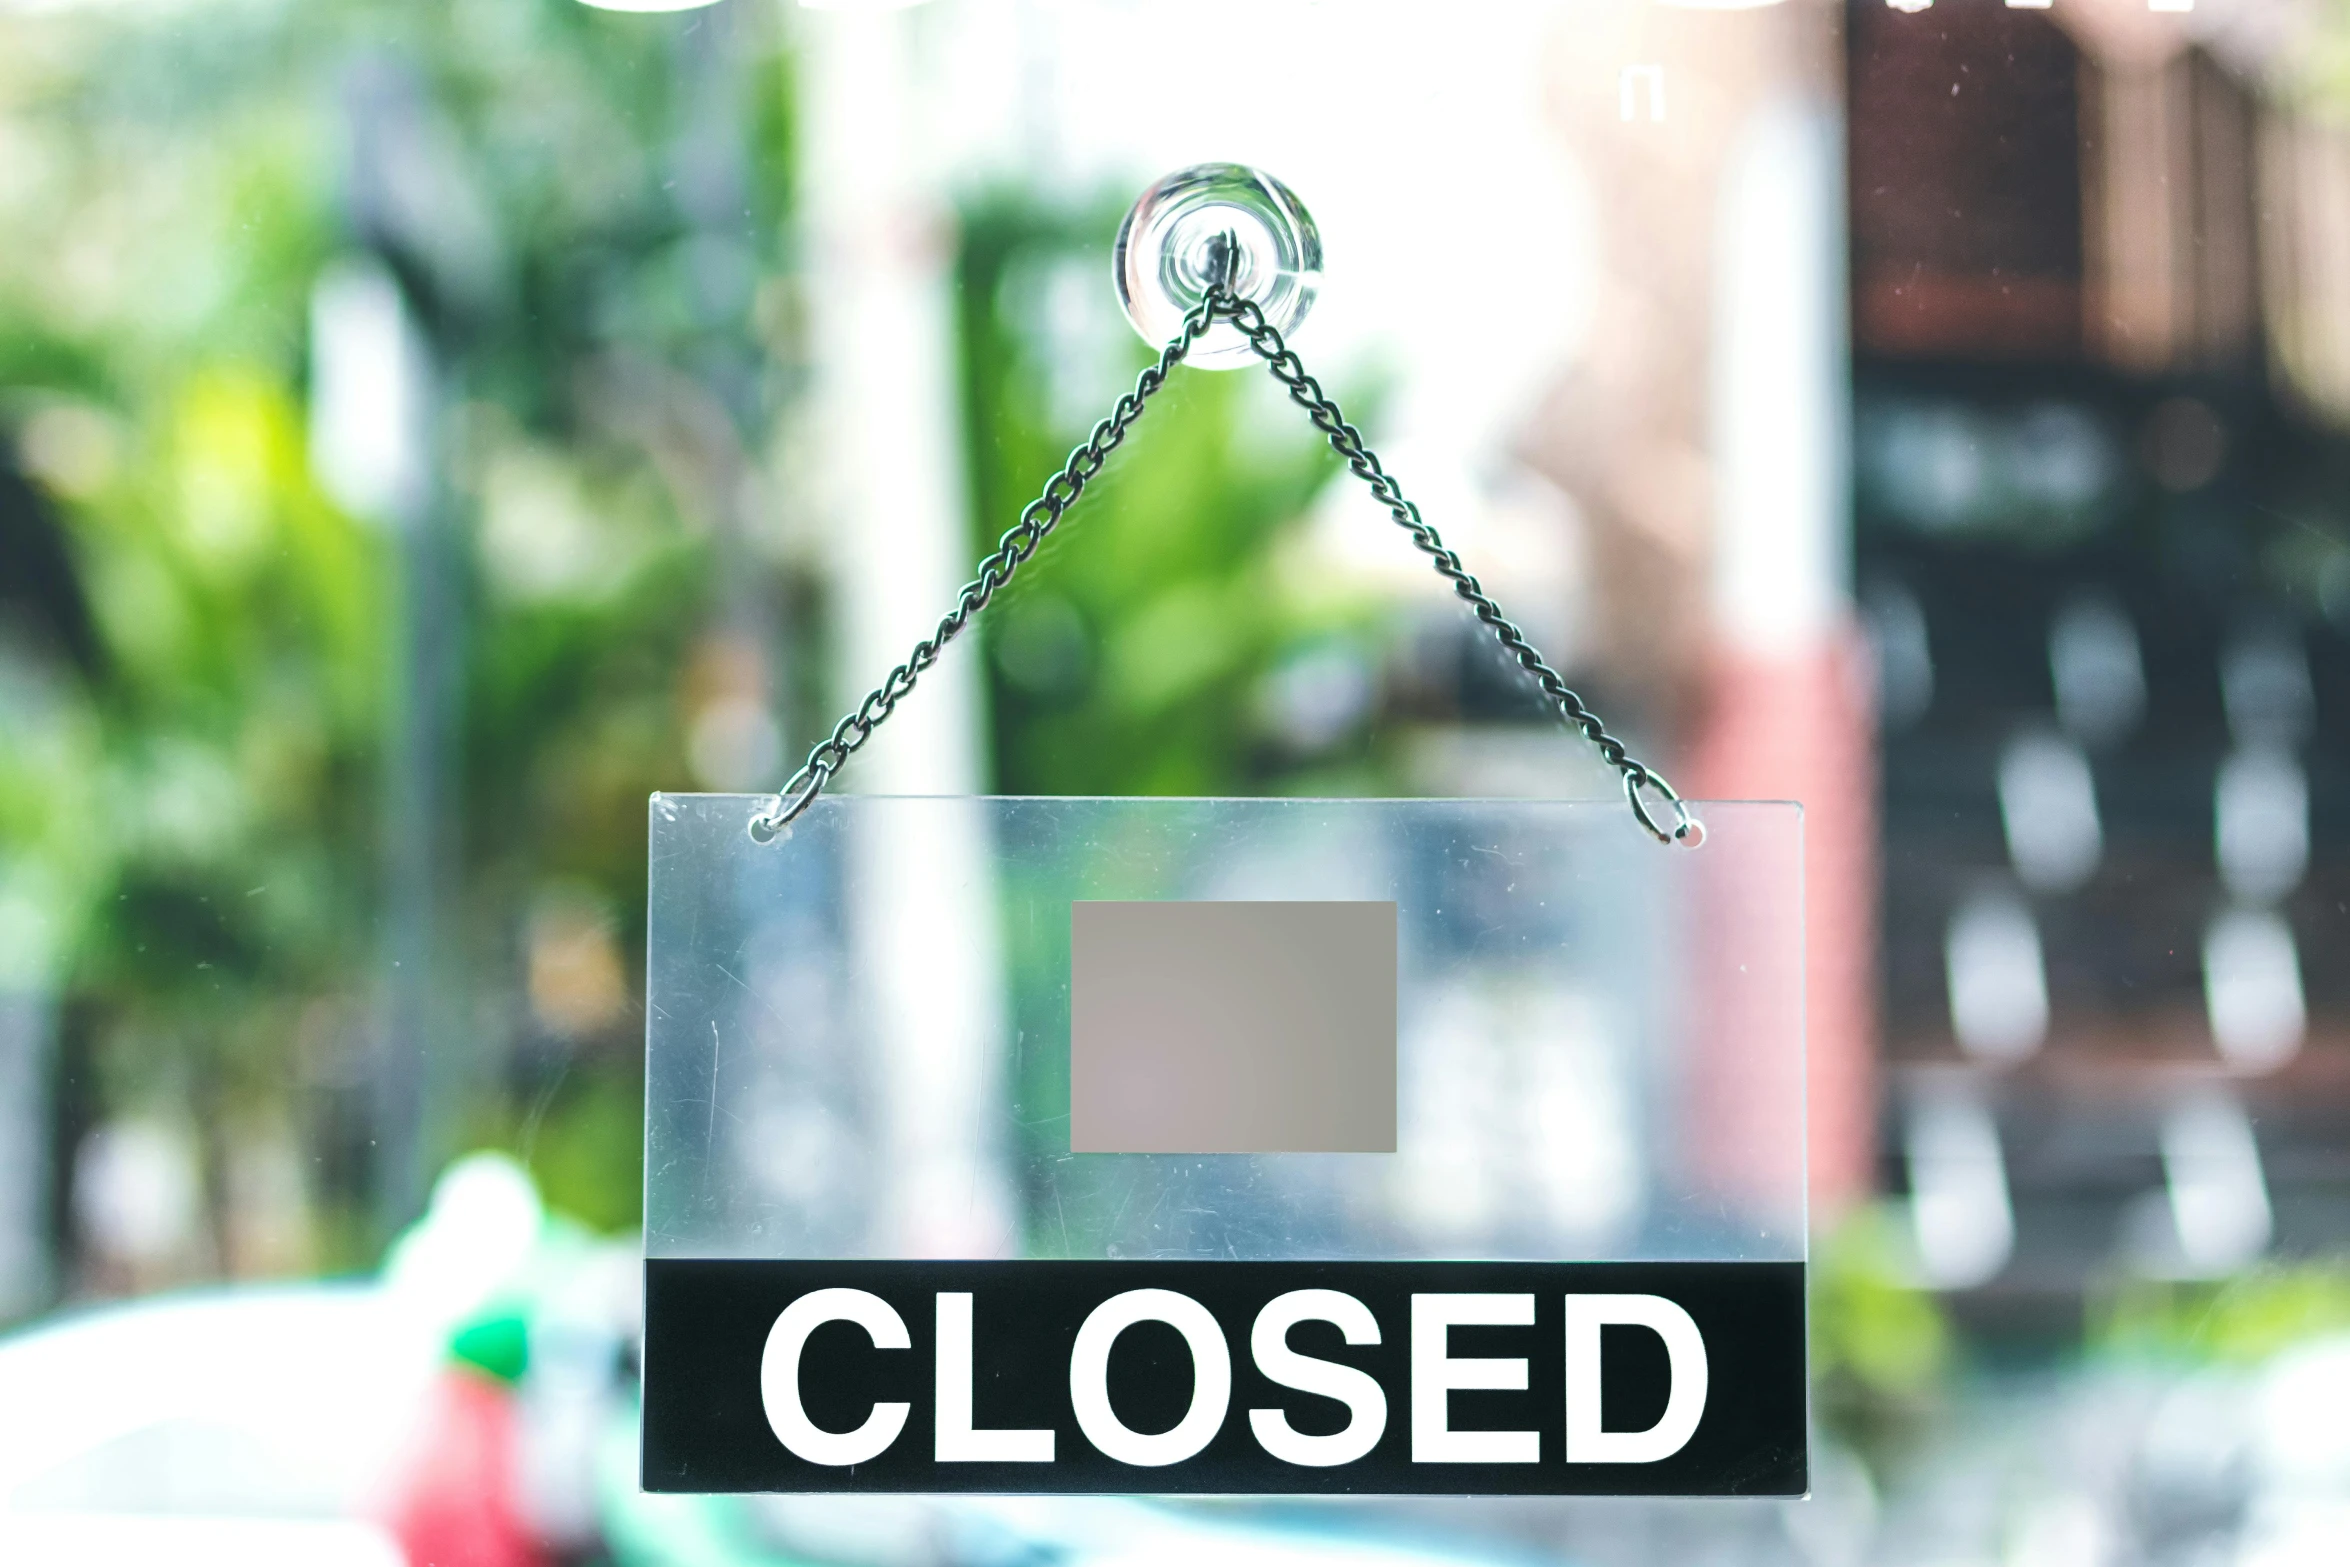 a closed sign hanging on a glass door, pexels, happening, square, made of glazed, unknown artist, holding close